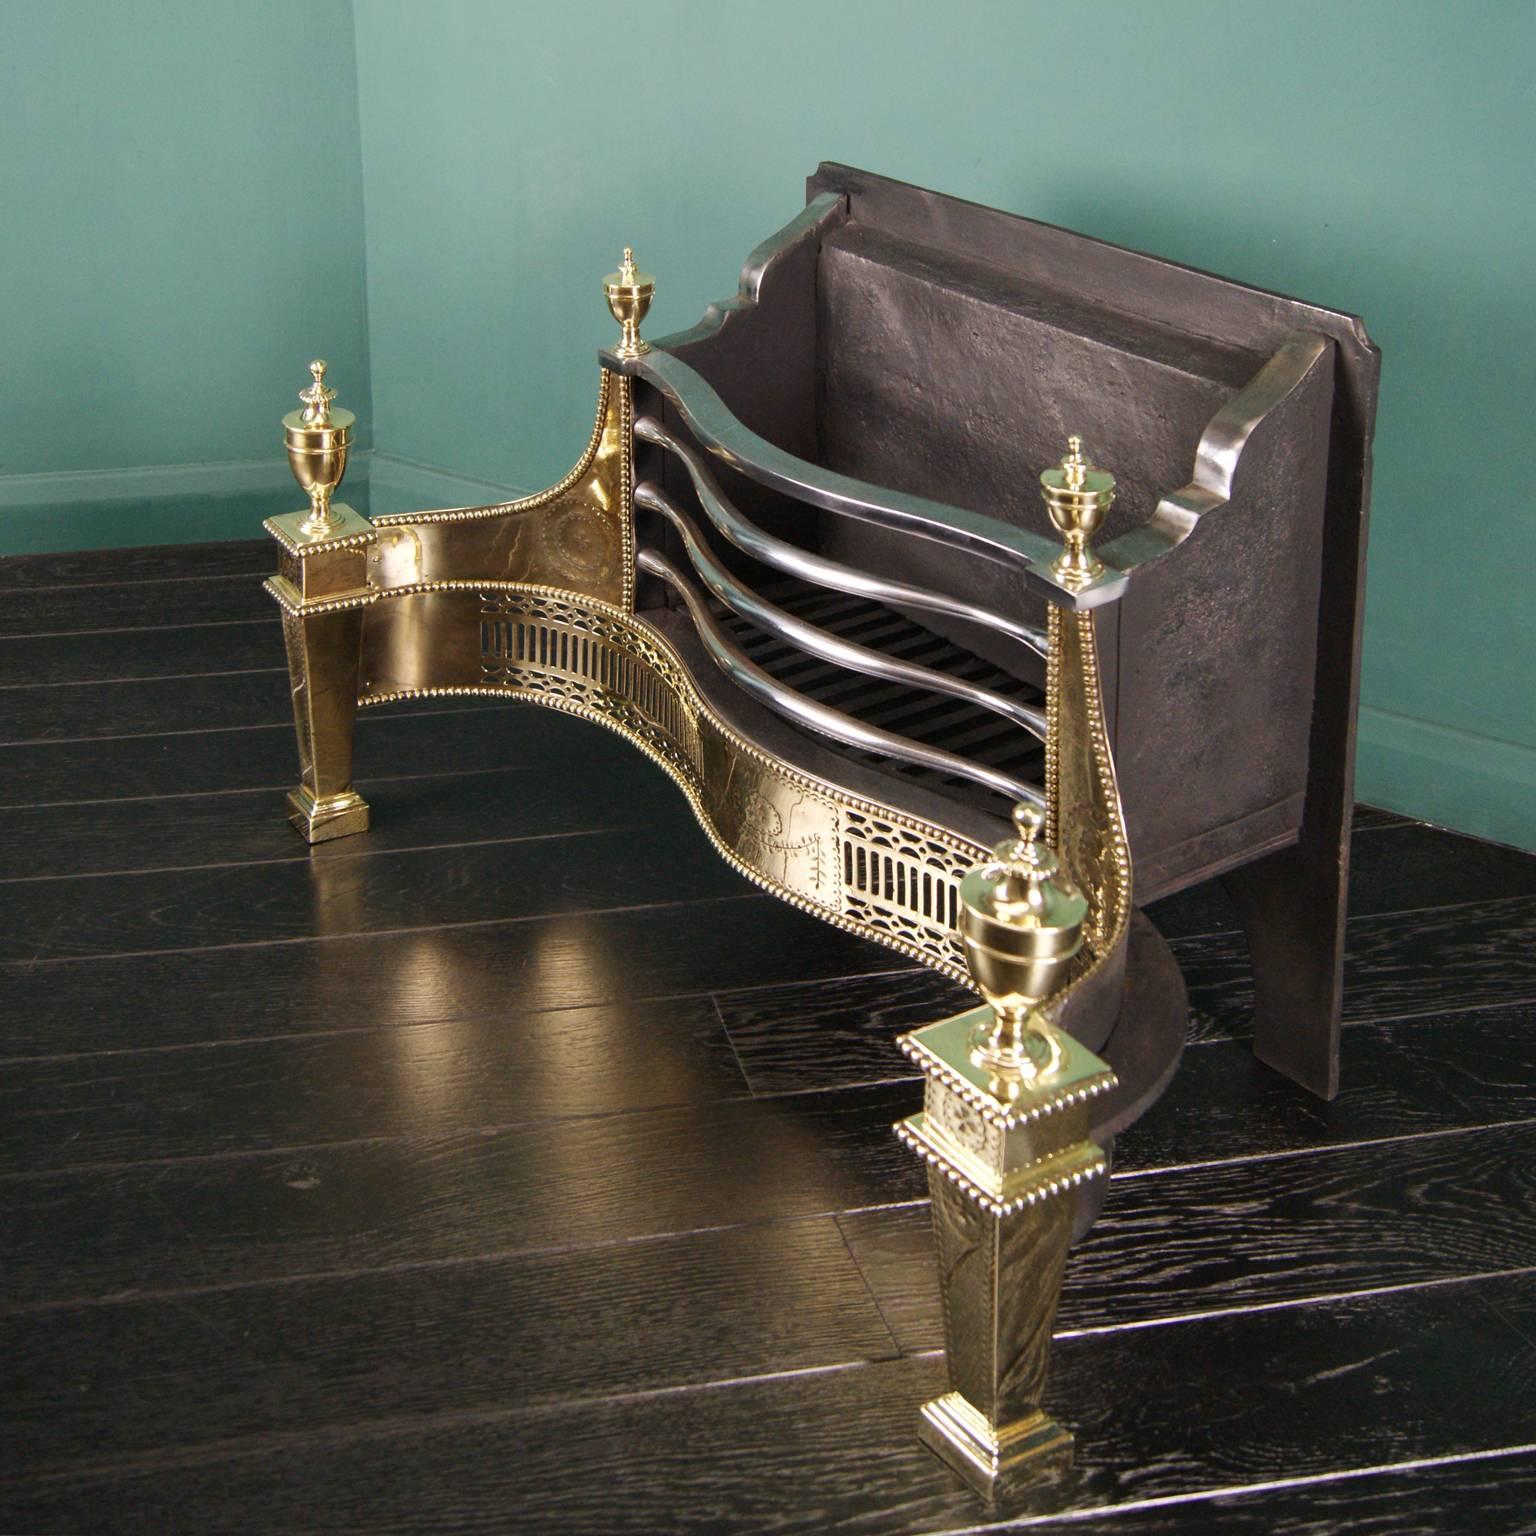 A large English Adam style polished brass fire grate (by Thomas Elsley). The fluted and pierced serpentine fret is set between square tapered legs with large brass urns. Fine engraving on wings, legs, and fret. This grate also features wrought-iron